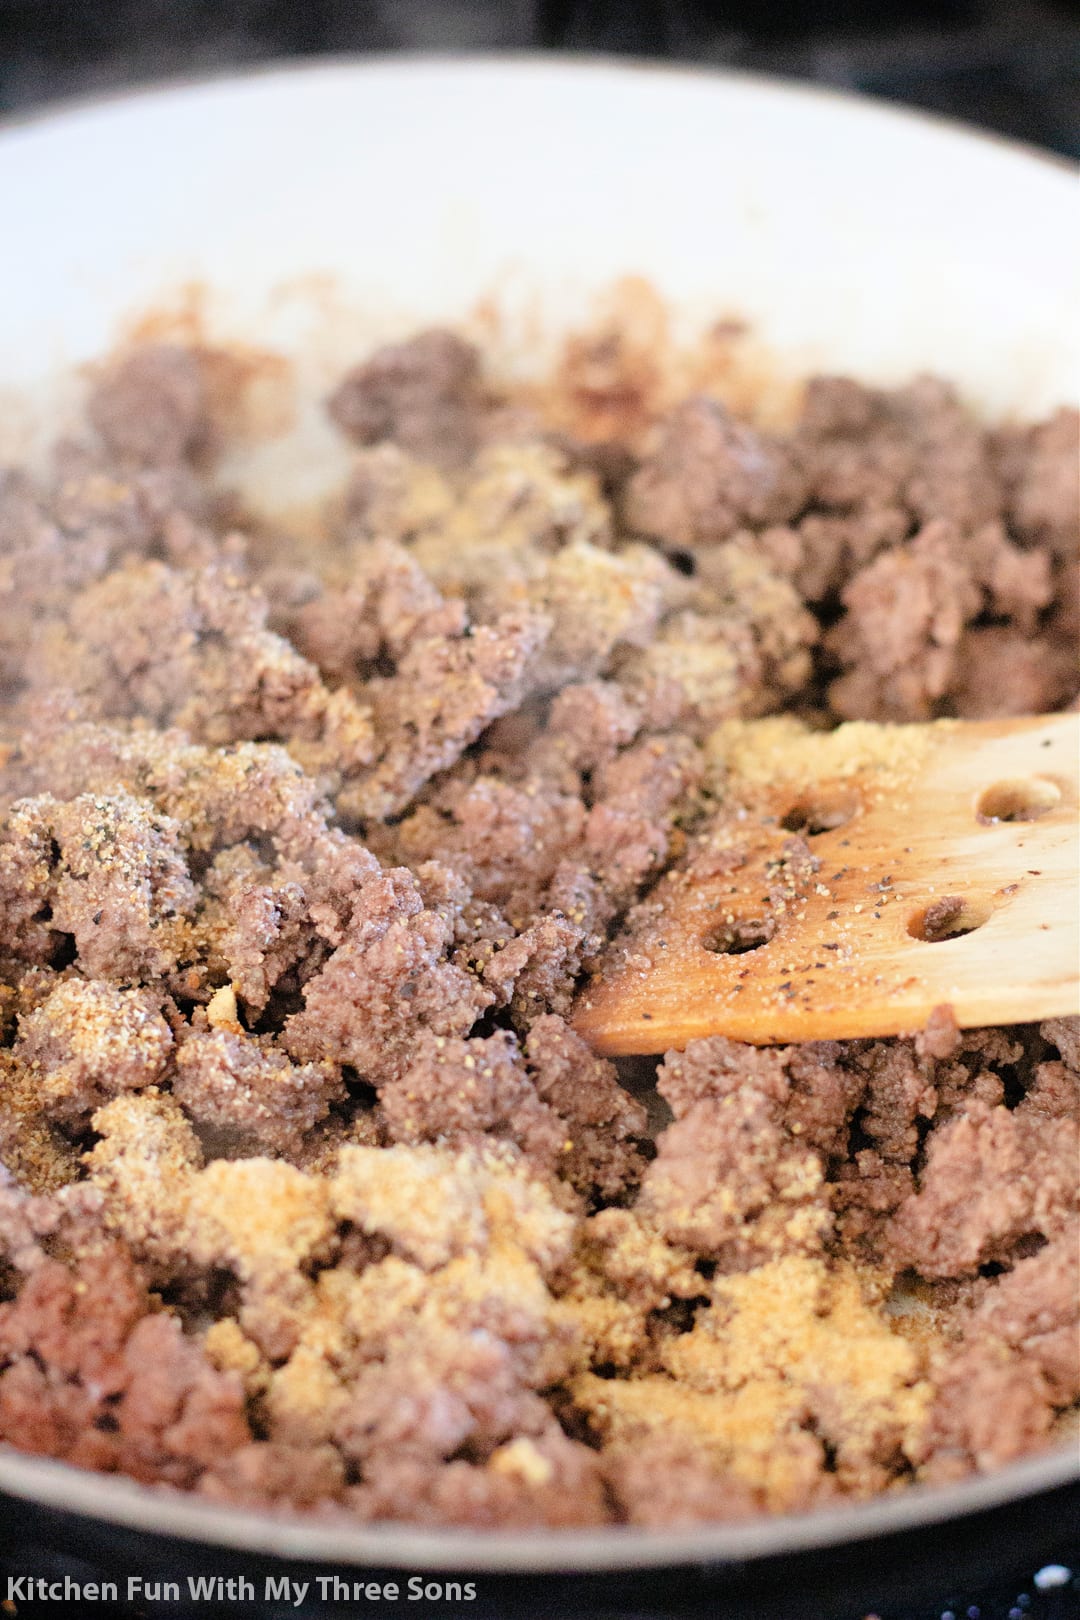 A pan of ground beef with garlic powder and ground ginger sprinkled over it